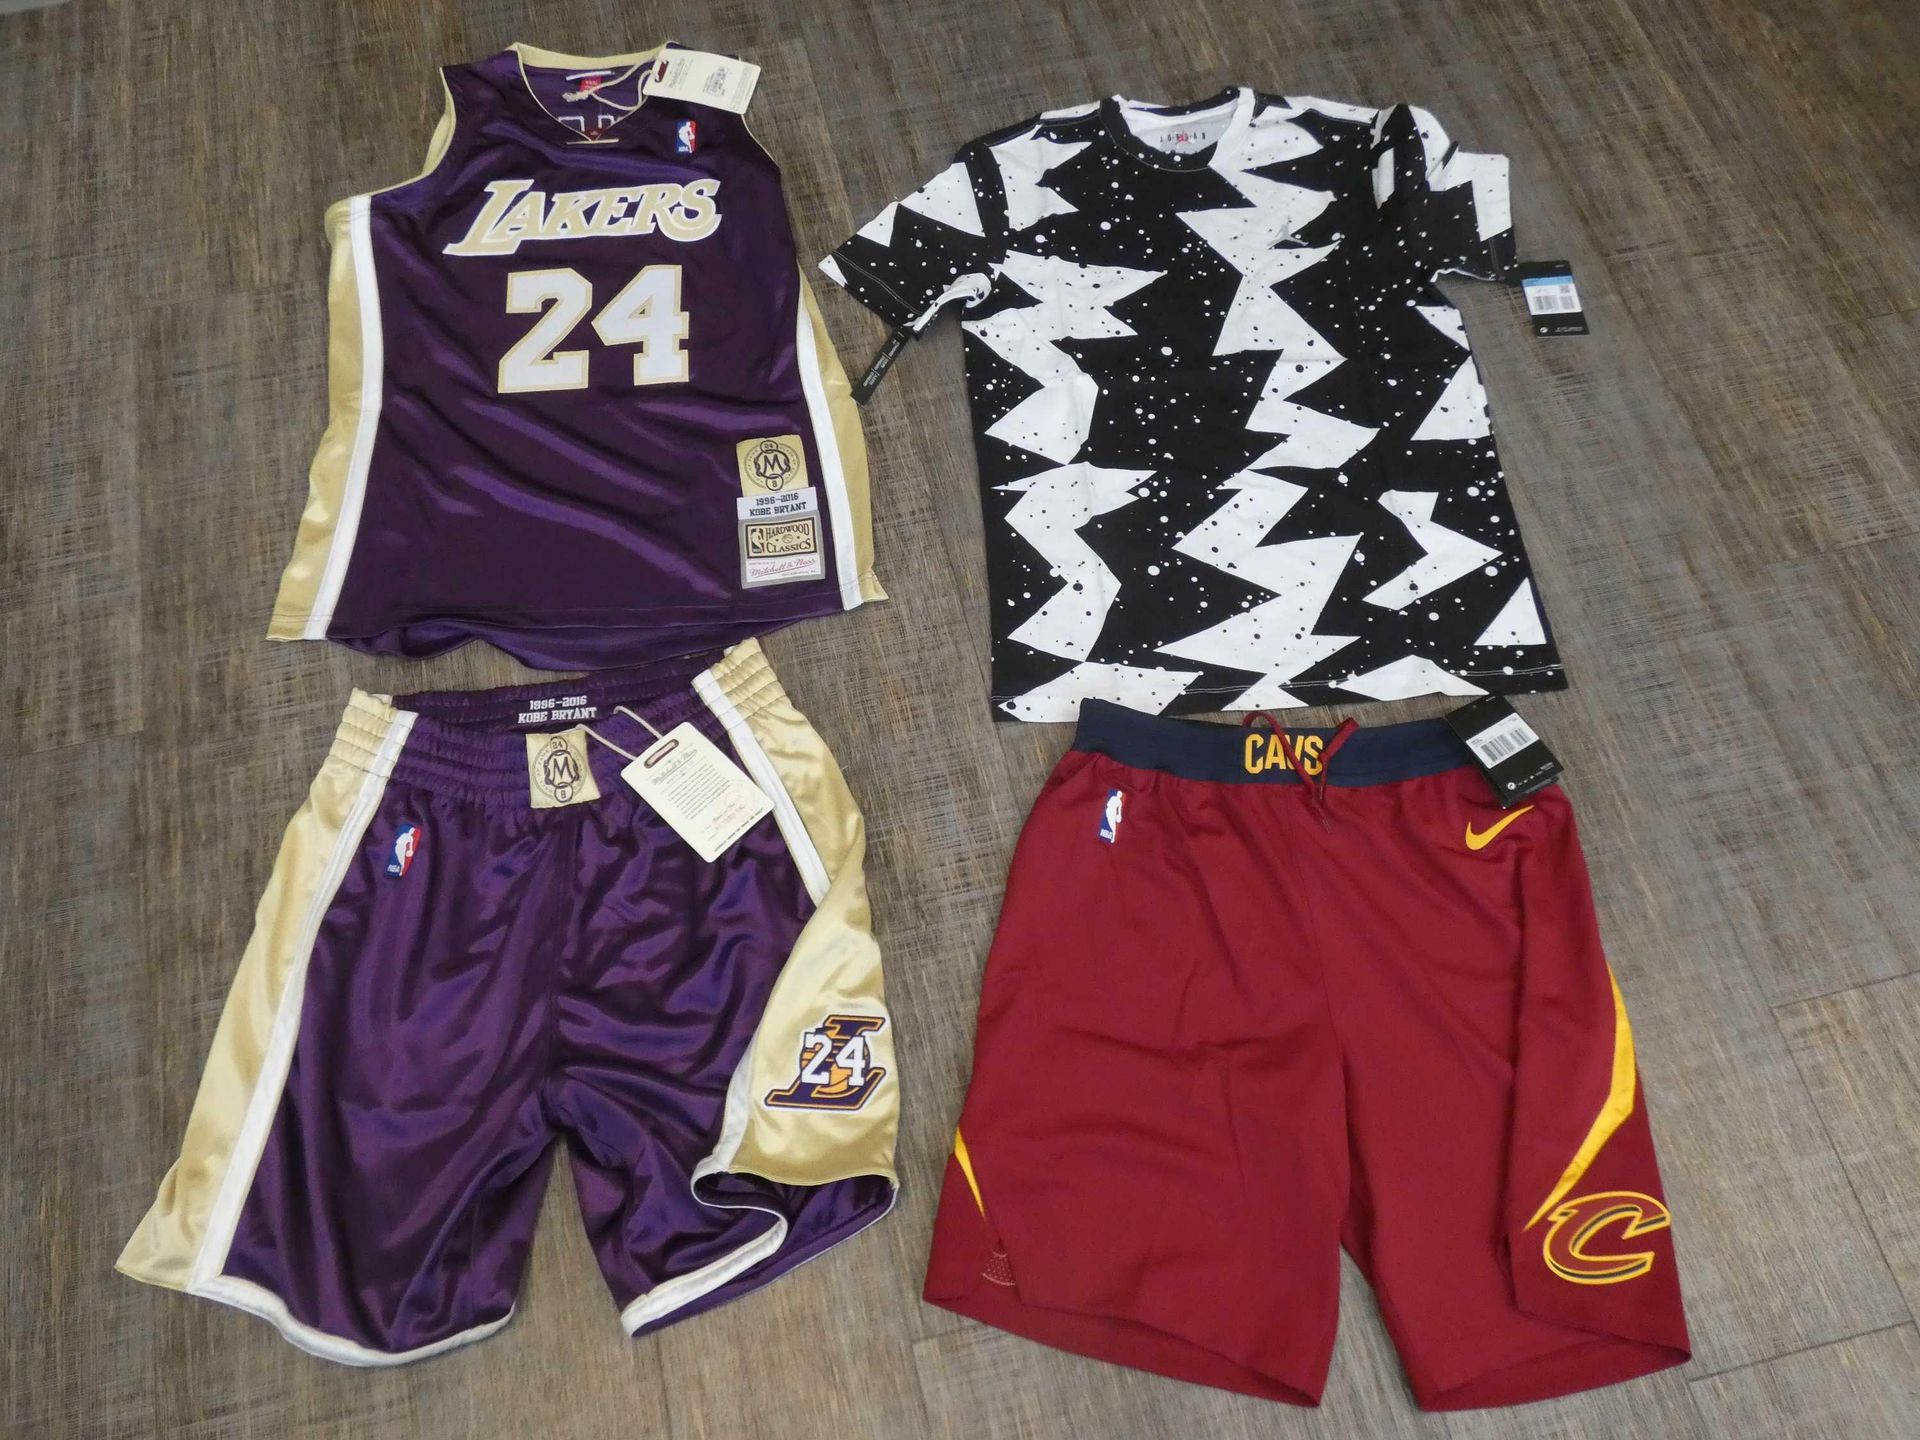 Null Clothing and accessories set in mint condition including:
- LAKERS / NBA je&hellip;